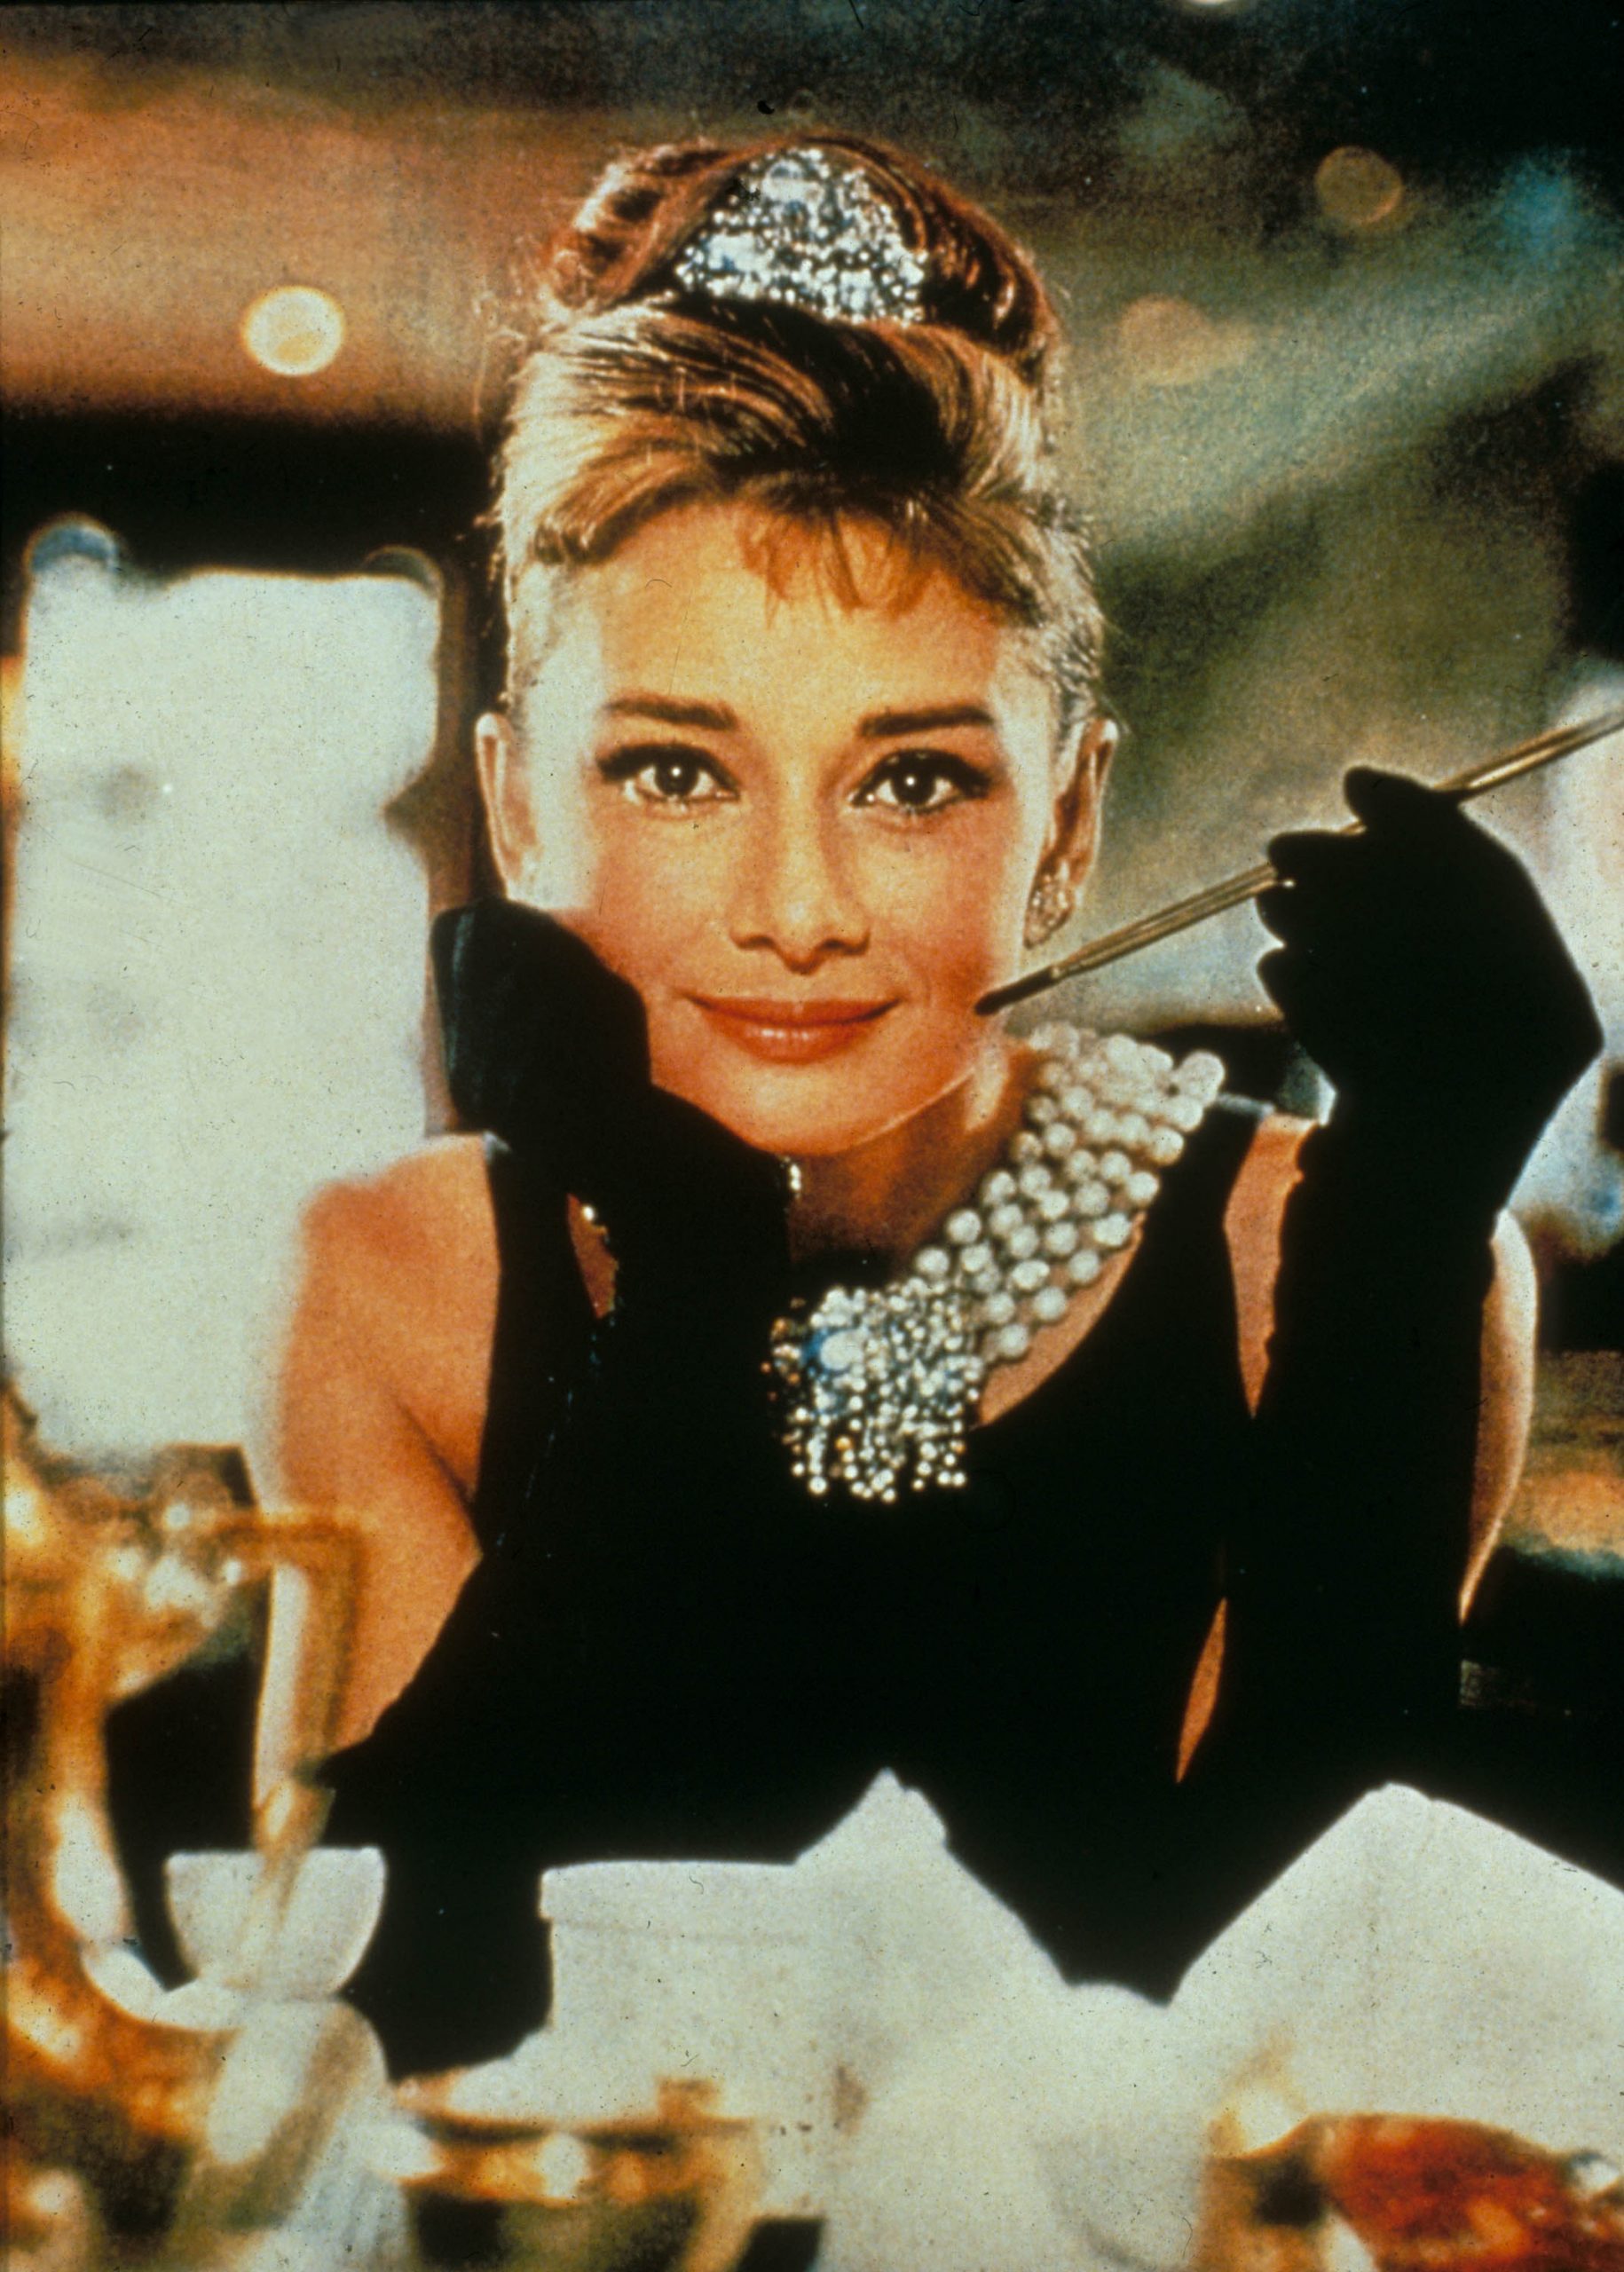 What it's like to have breakfast at Tiffany's - The Washington Post